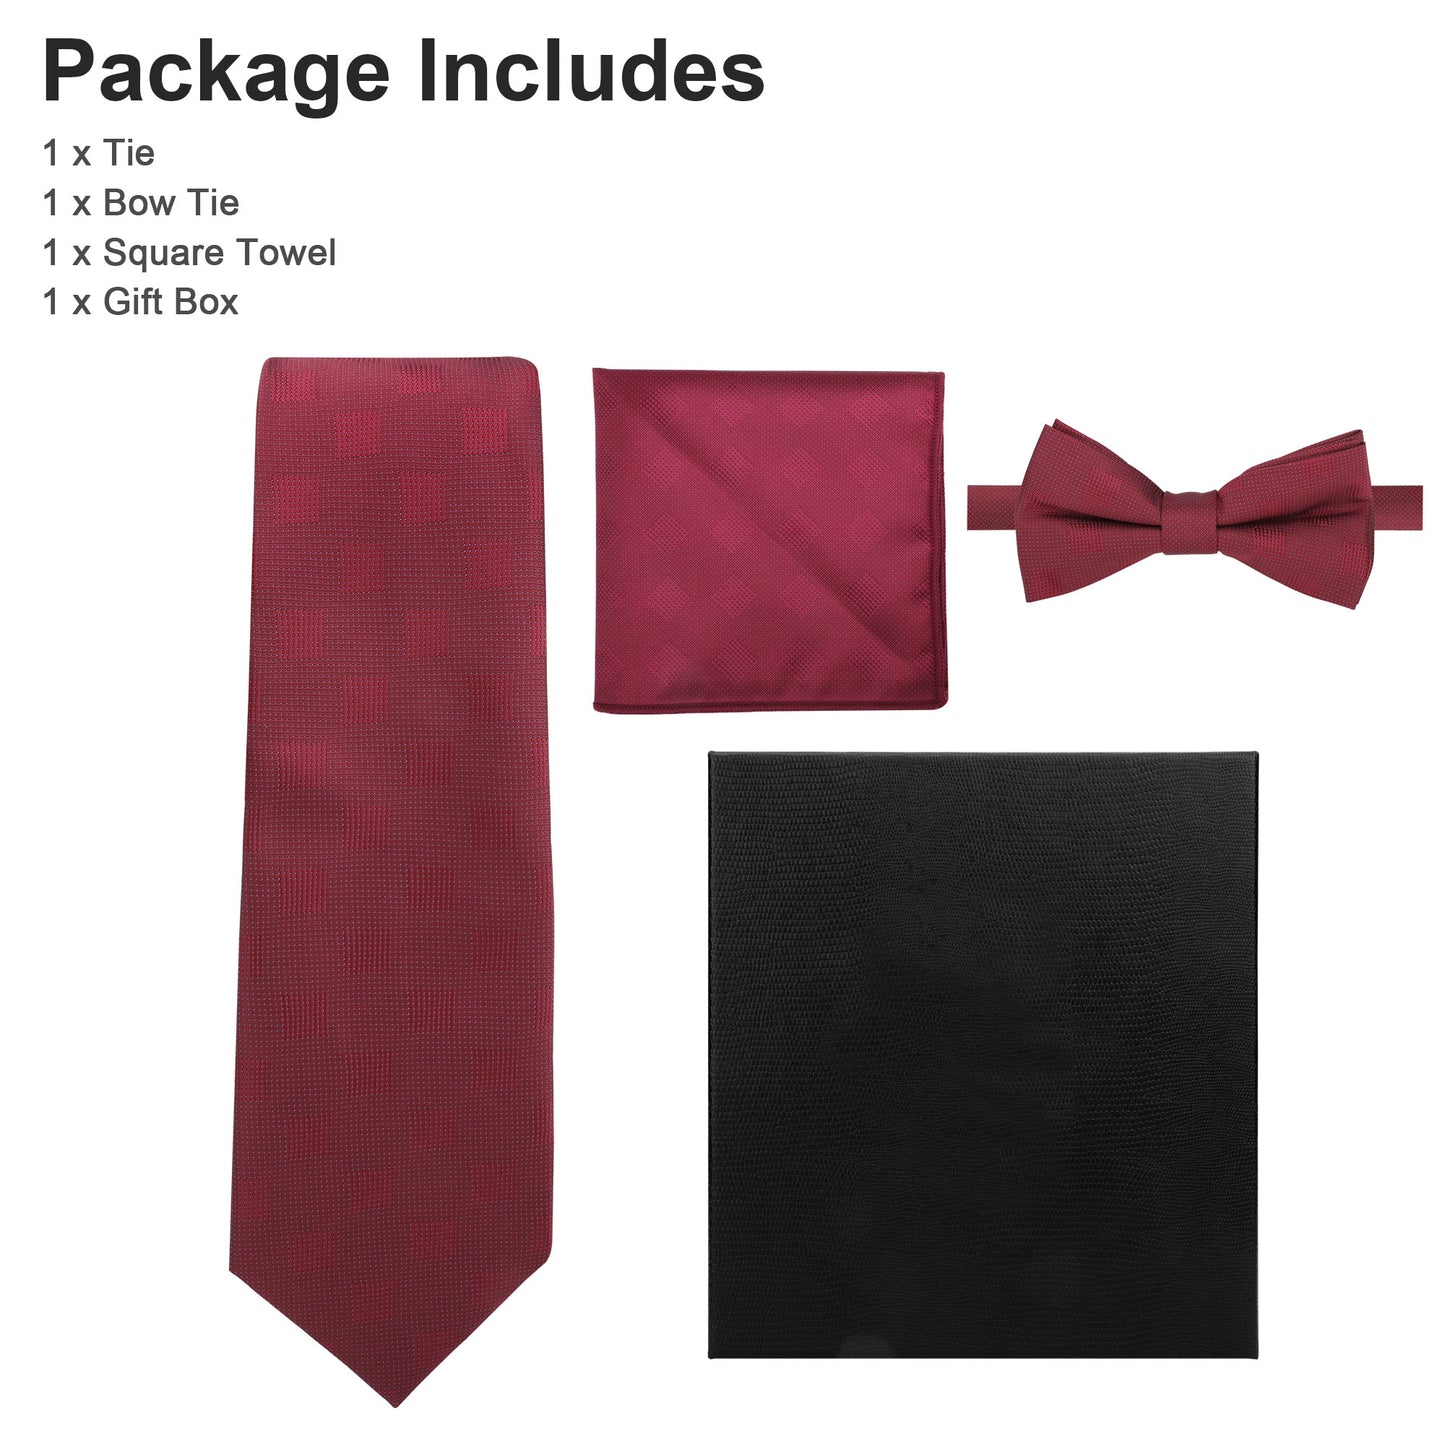 Men's Accessories Set - Tie, Bow Tie, Square Towel, and Gift Box for Formal Occasions